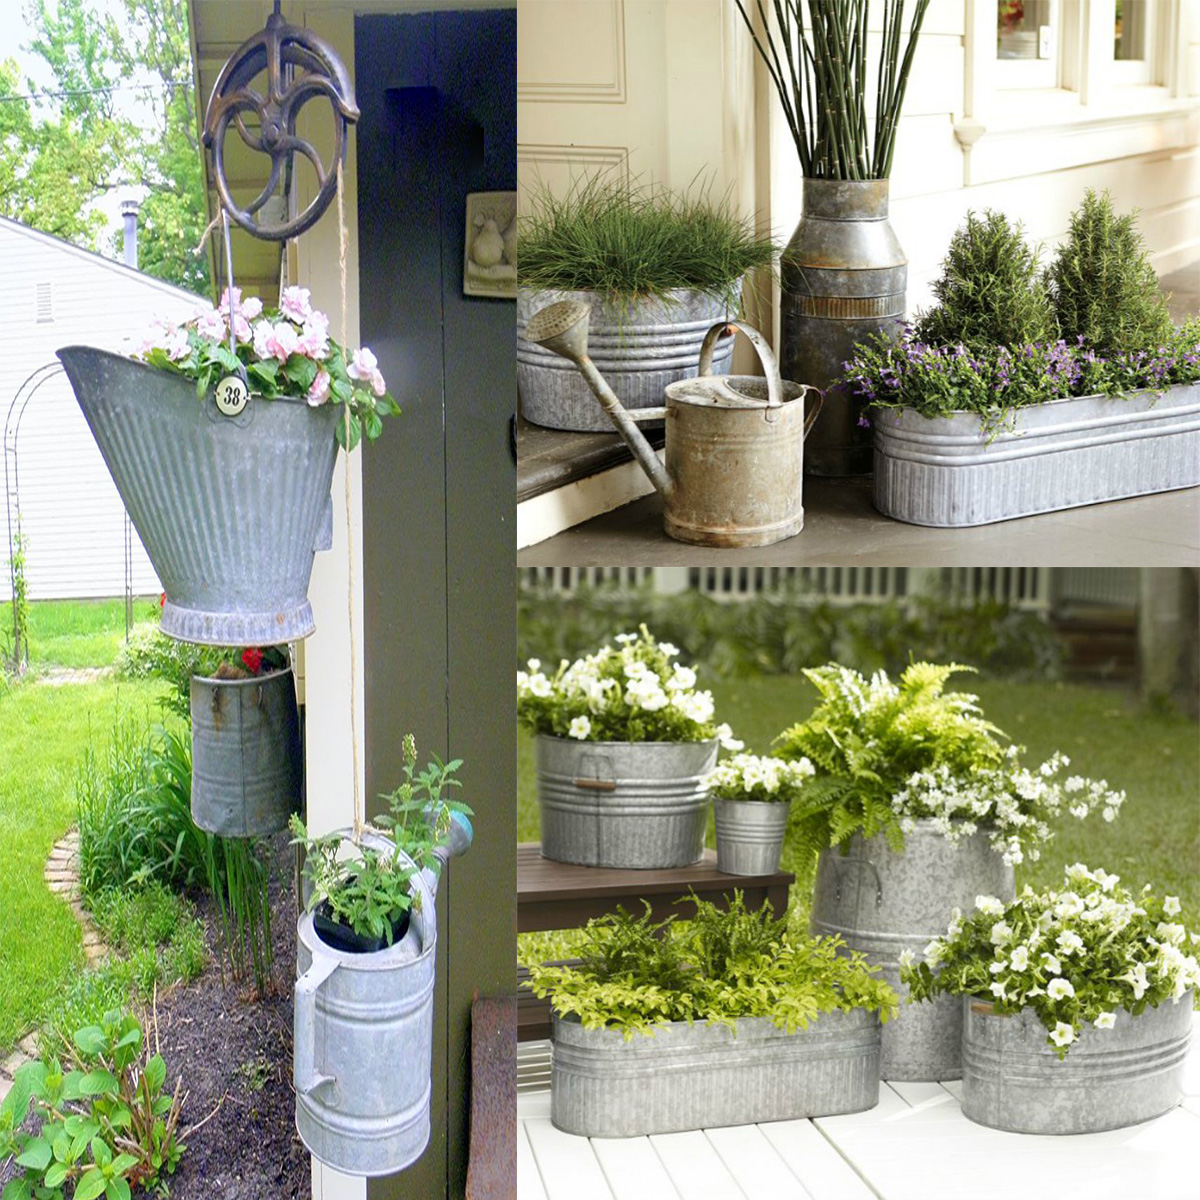 I particularly like to use galvanized planters​ for indoor plants